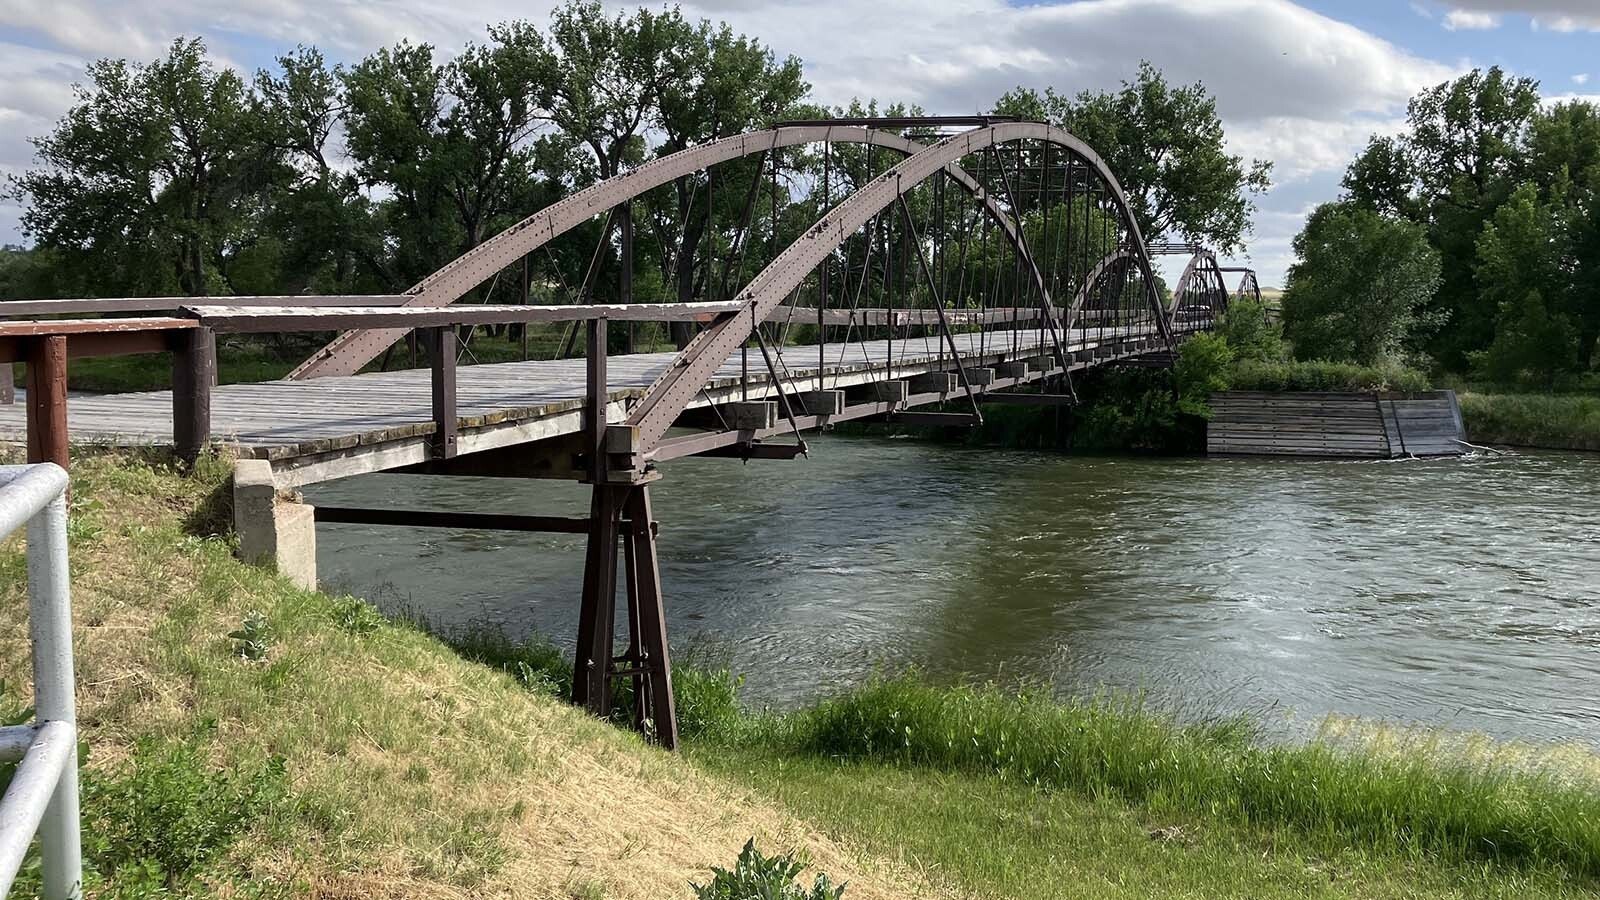 The Fort Laramie Bridge across the North Platte River intially served Wyoming Territory and then the state of Wyoming through county ownership until 1958.